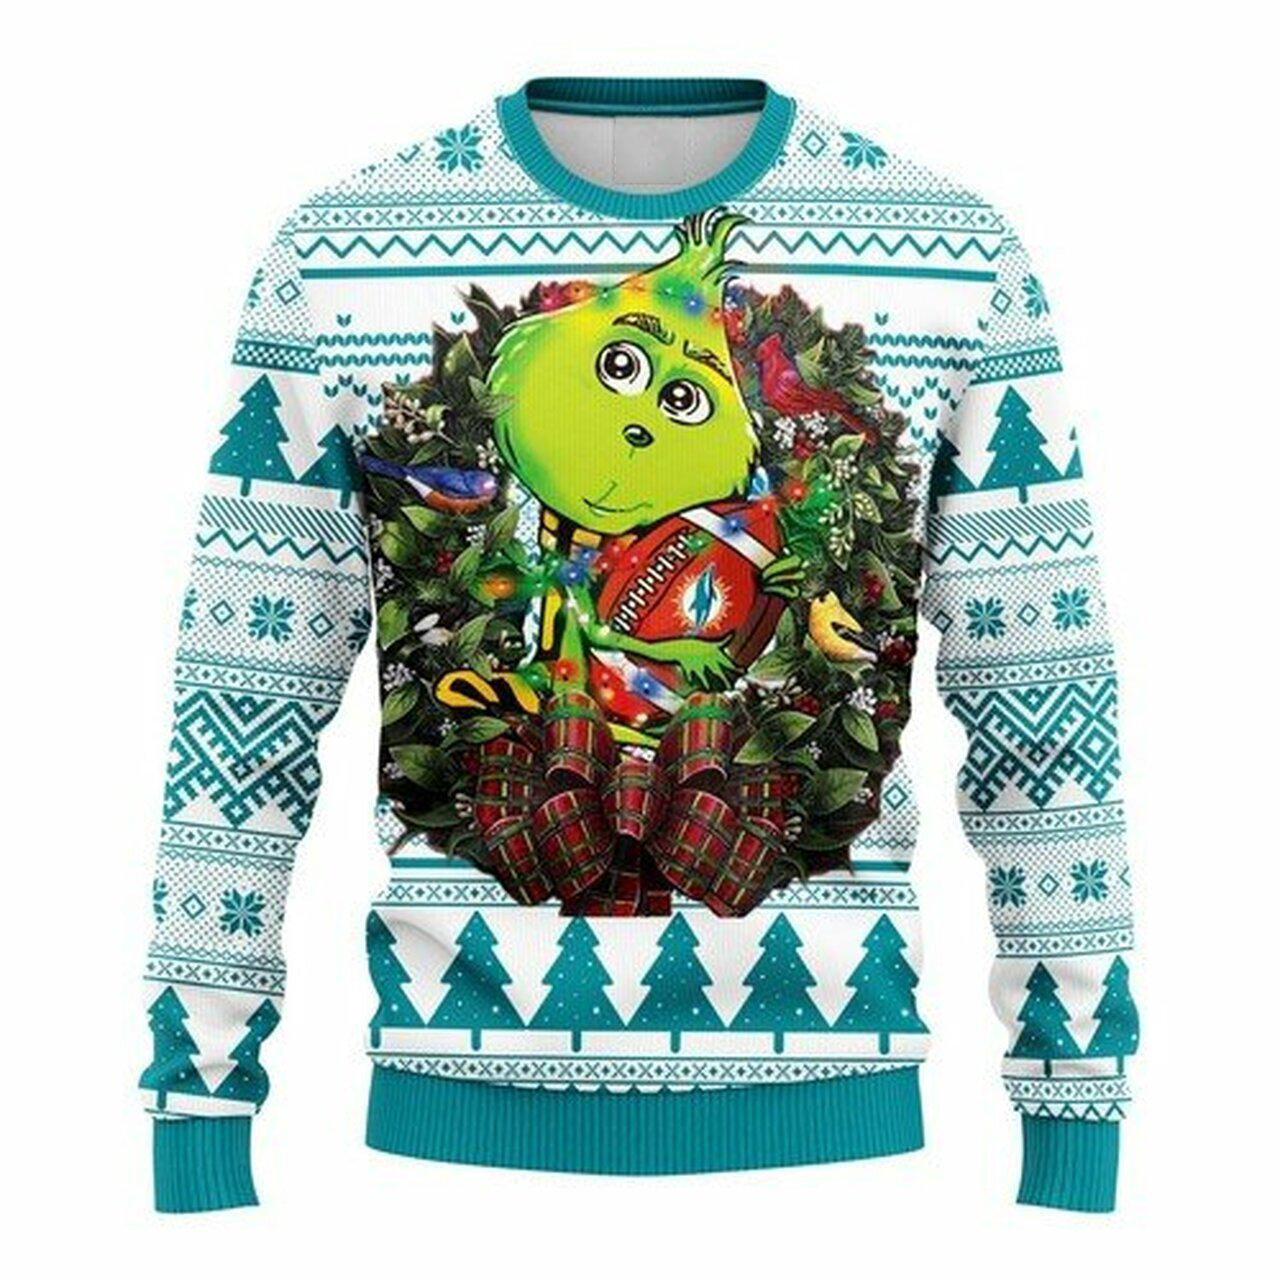 NFL Miami Dolphins Grinch hug ugly christmas sweater